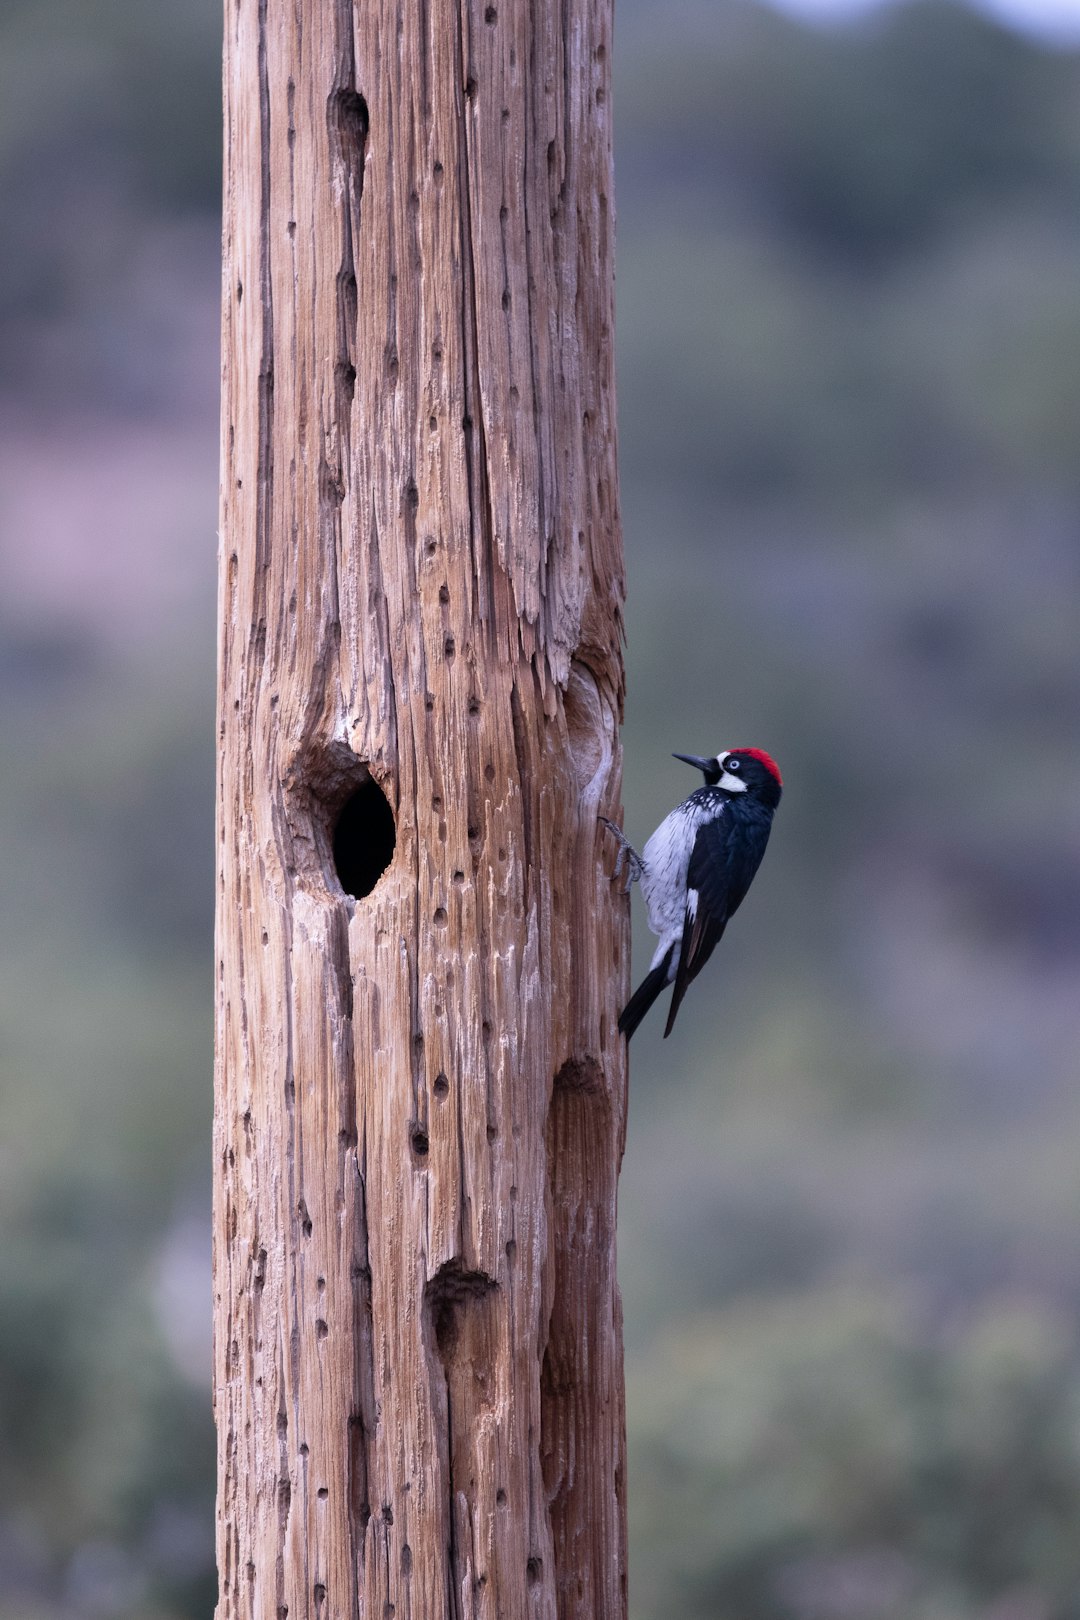  black and white bird on brown wooden post during daytime woodpecker